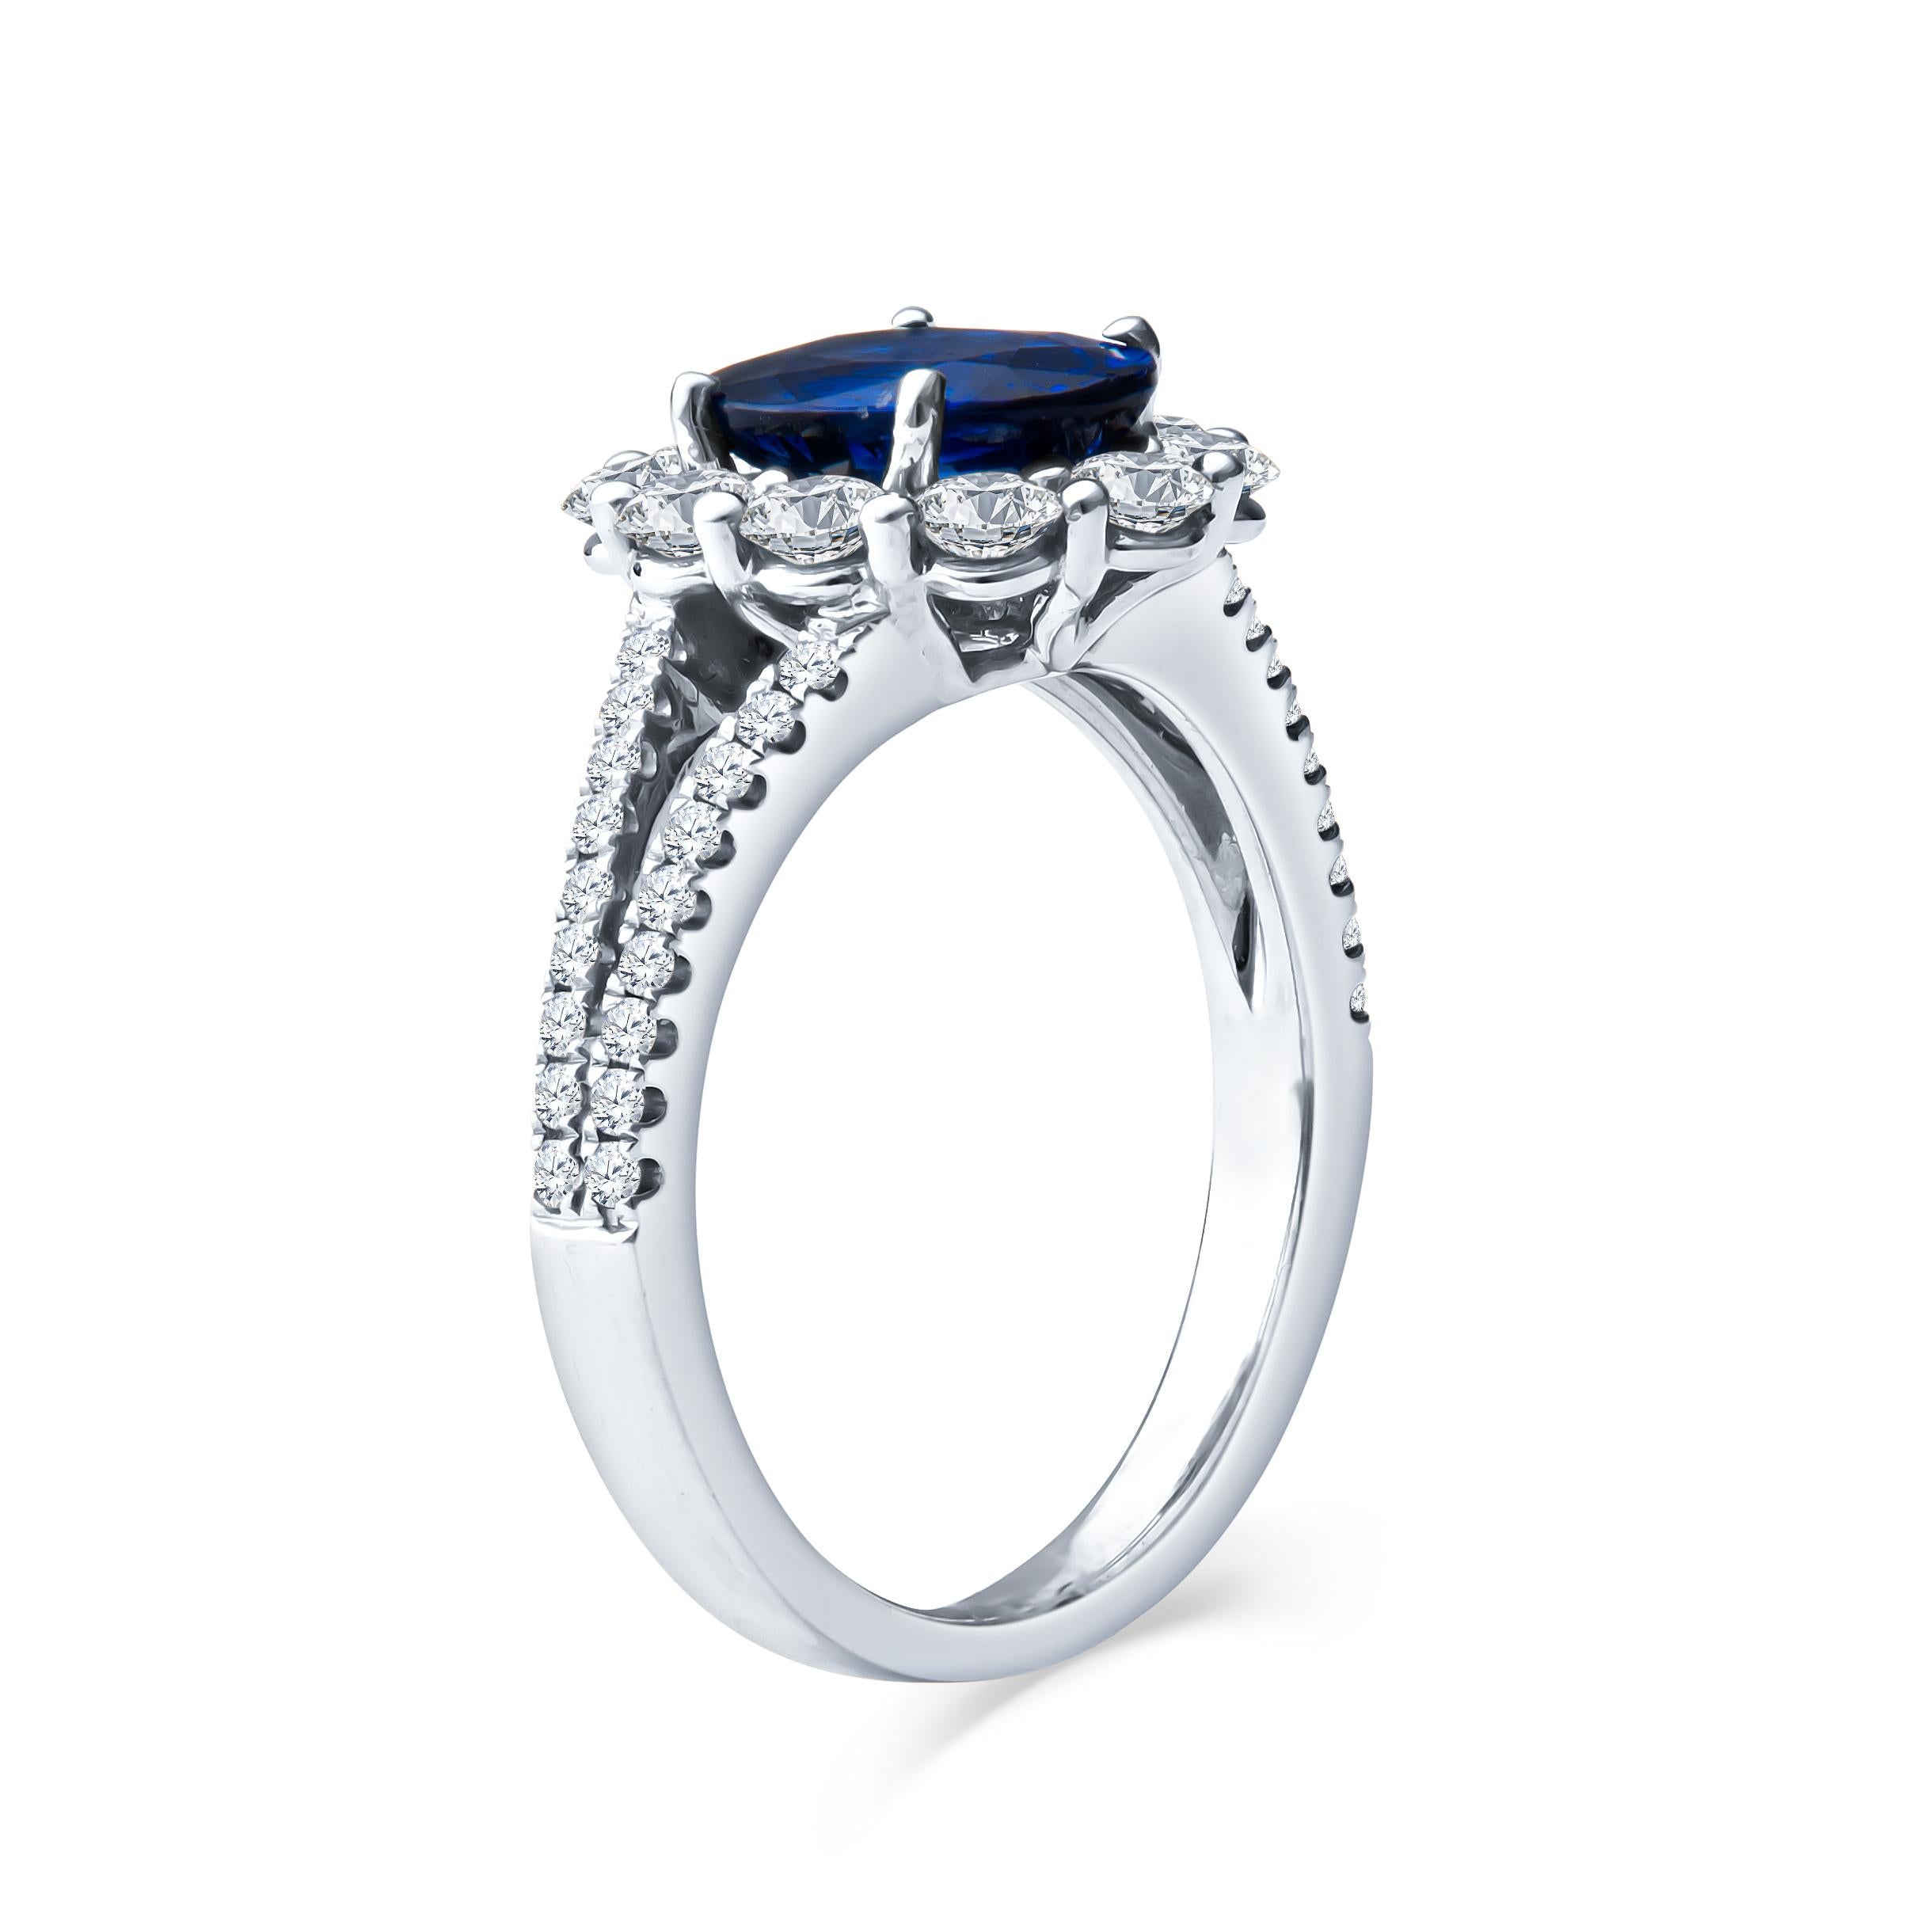 Oval Cut 1.90ct Oval Blue Sapphire and 1.12 Carat Round Diamond Halo 18kt White Gold Ring